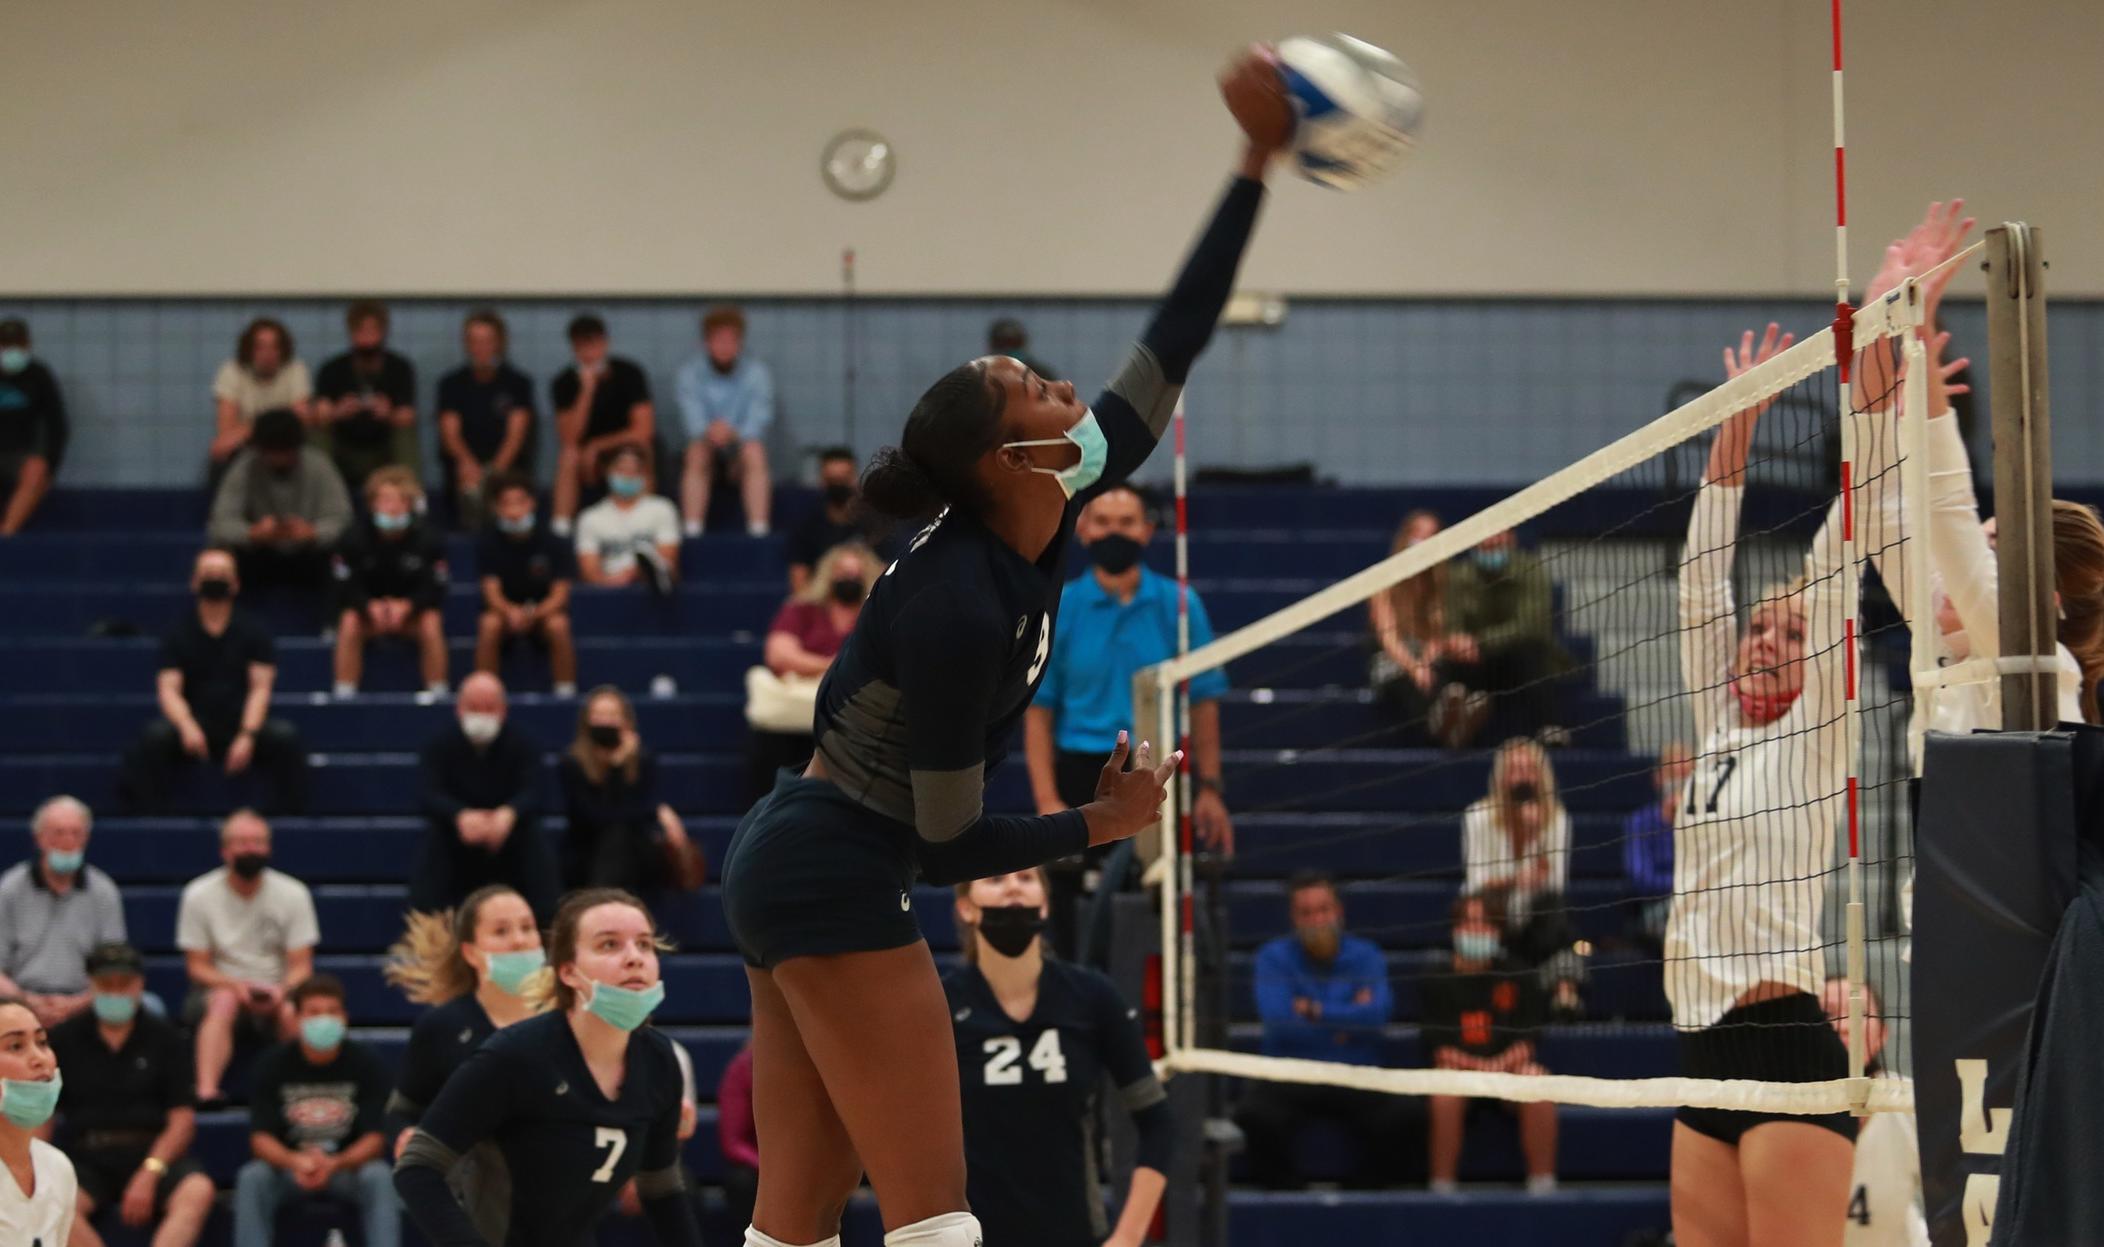 Jayli Nealy named a CCCWVCA state player of the week